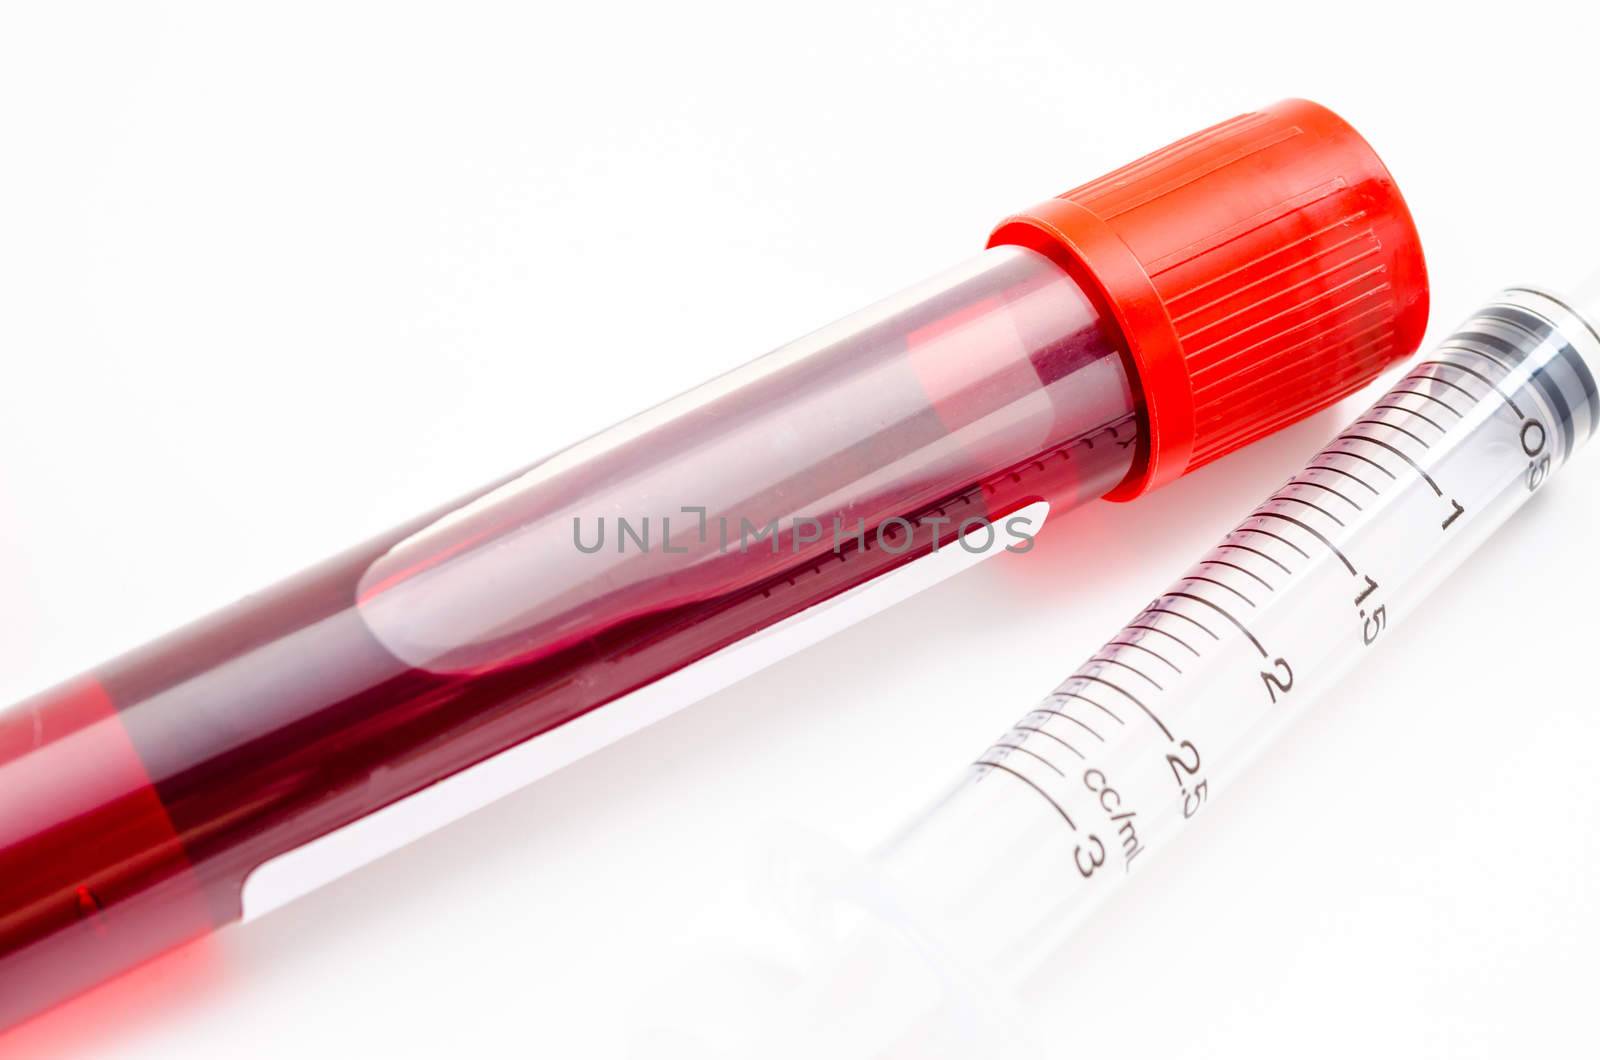 Blood sample in tube blood for screening test and syringe on white background.